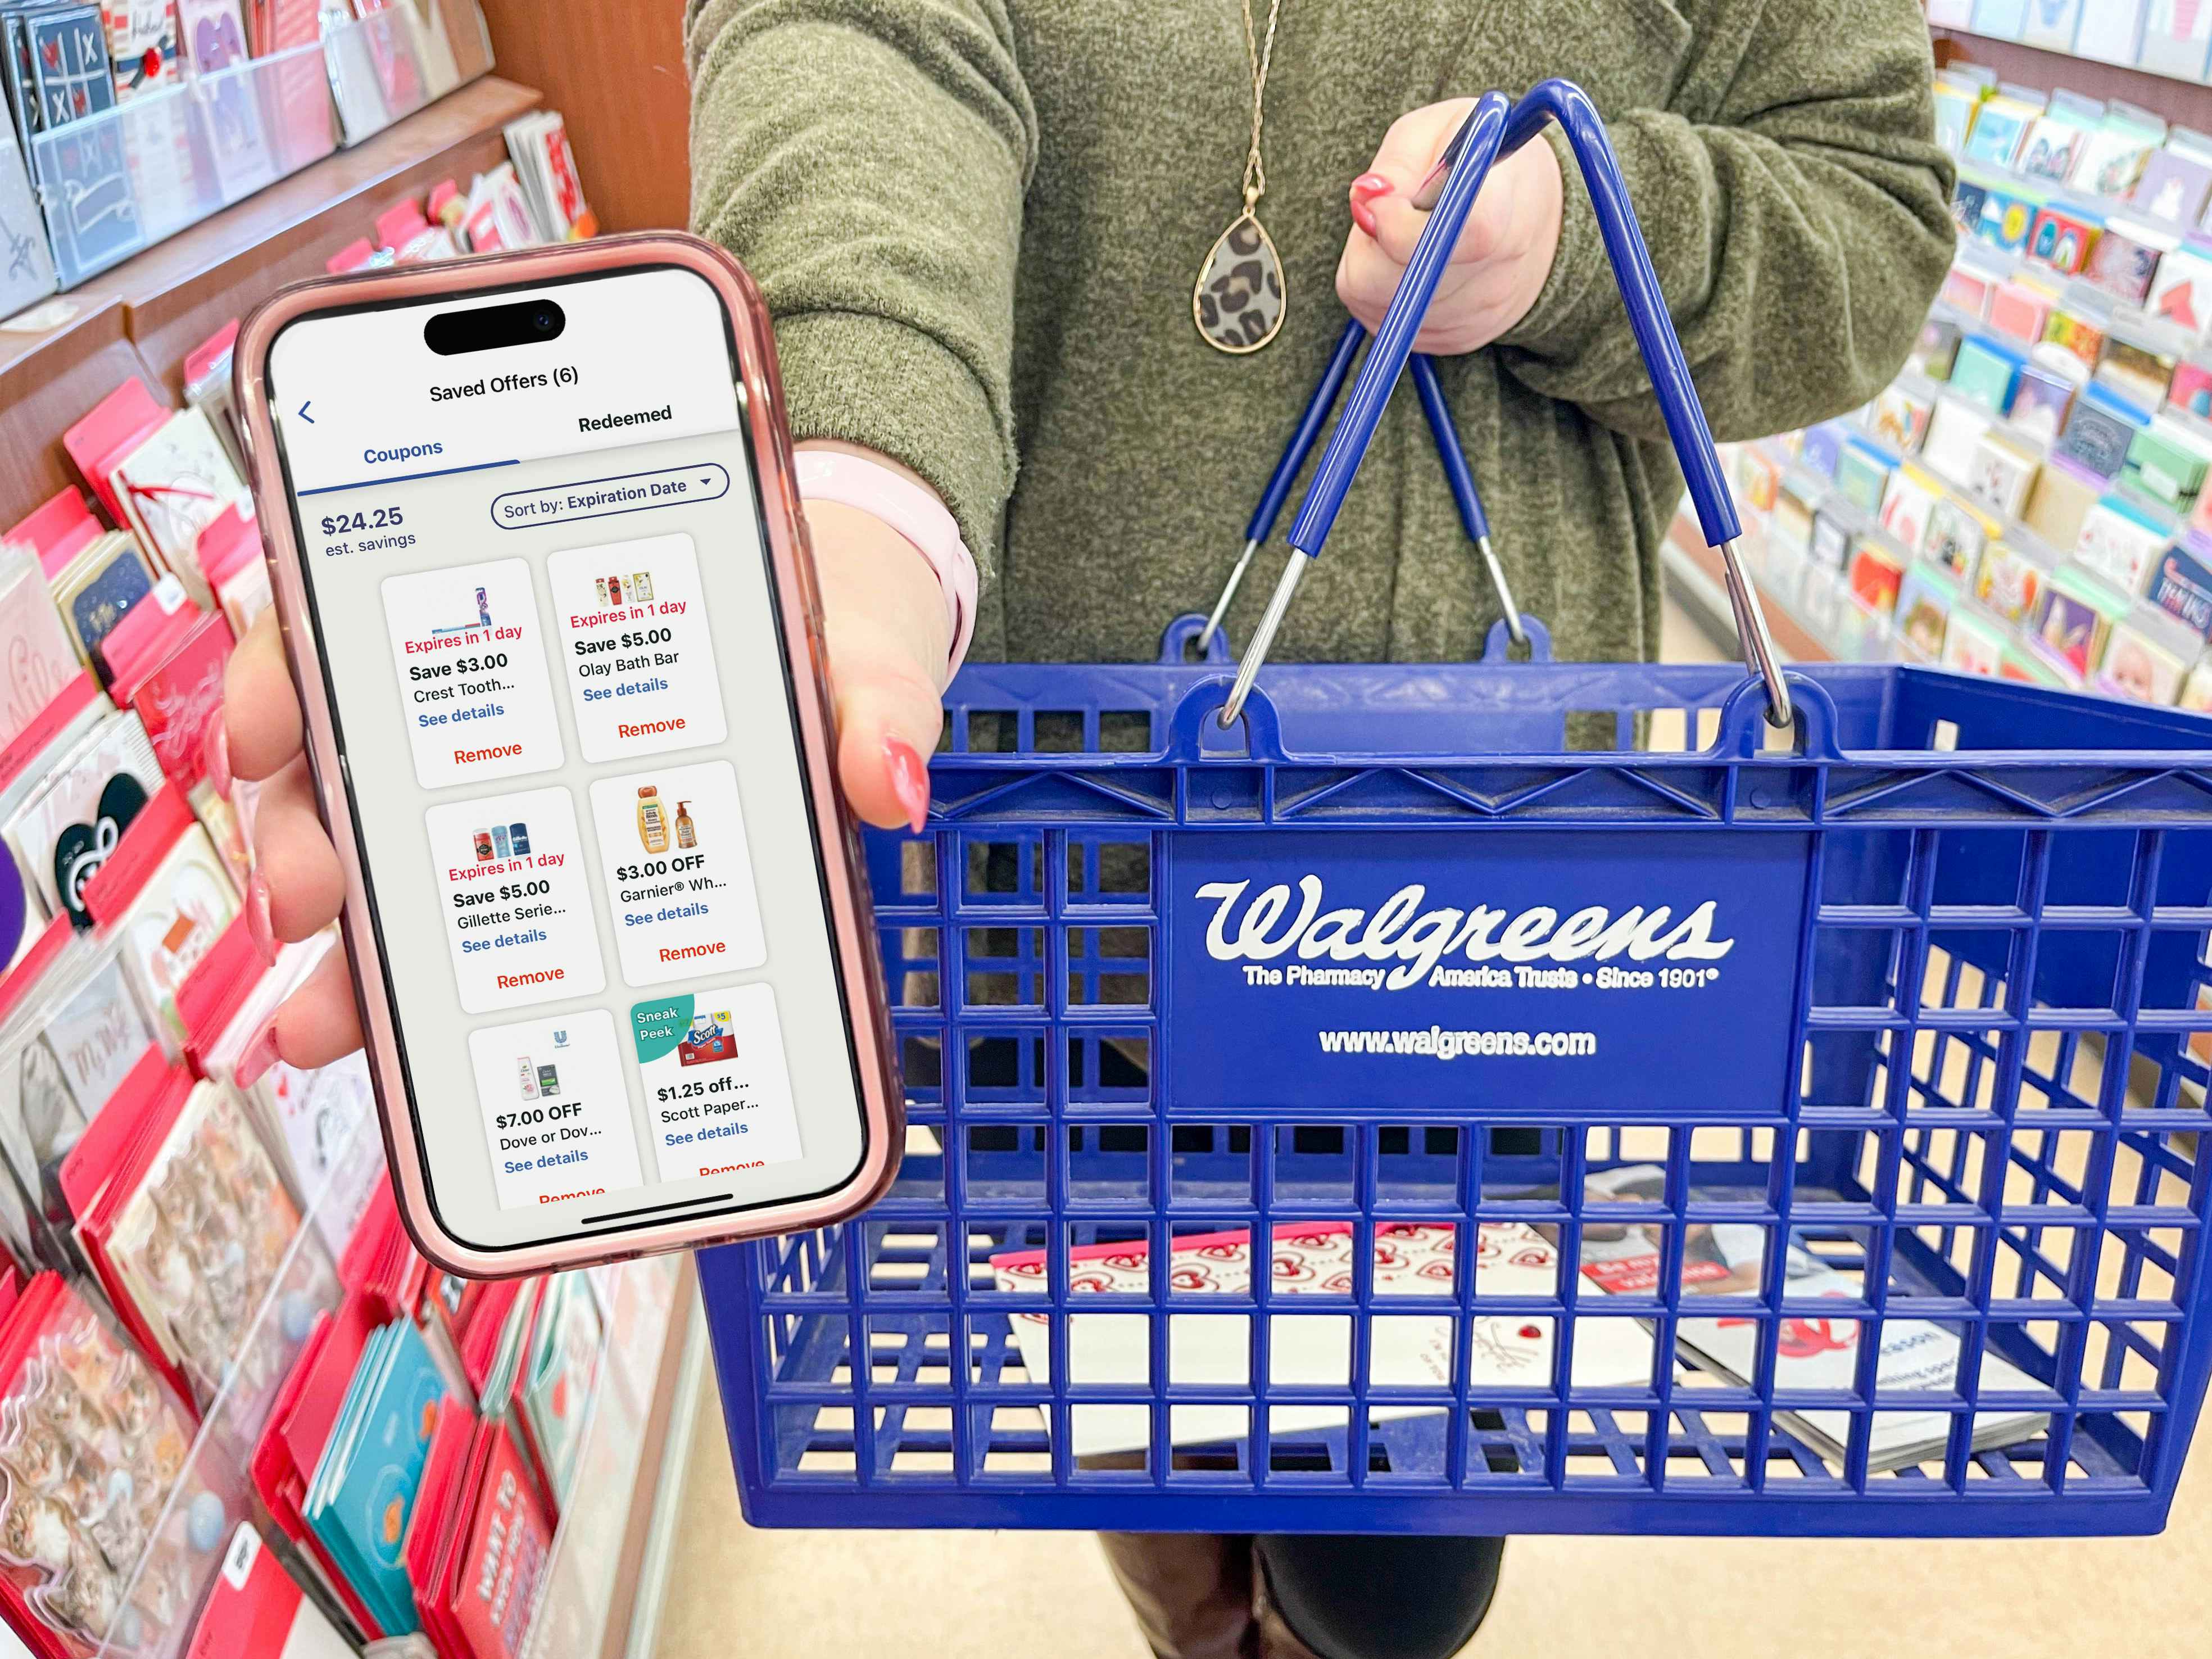 Someone holding a phone displaying the coupons in the Walgreens app and holding a Walgreens shopping basket